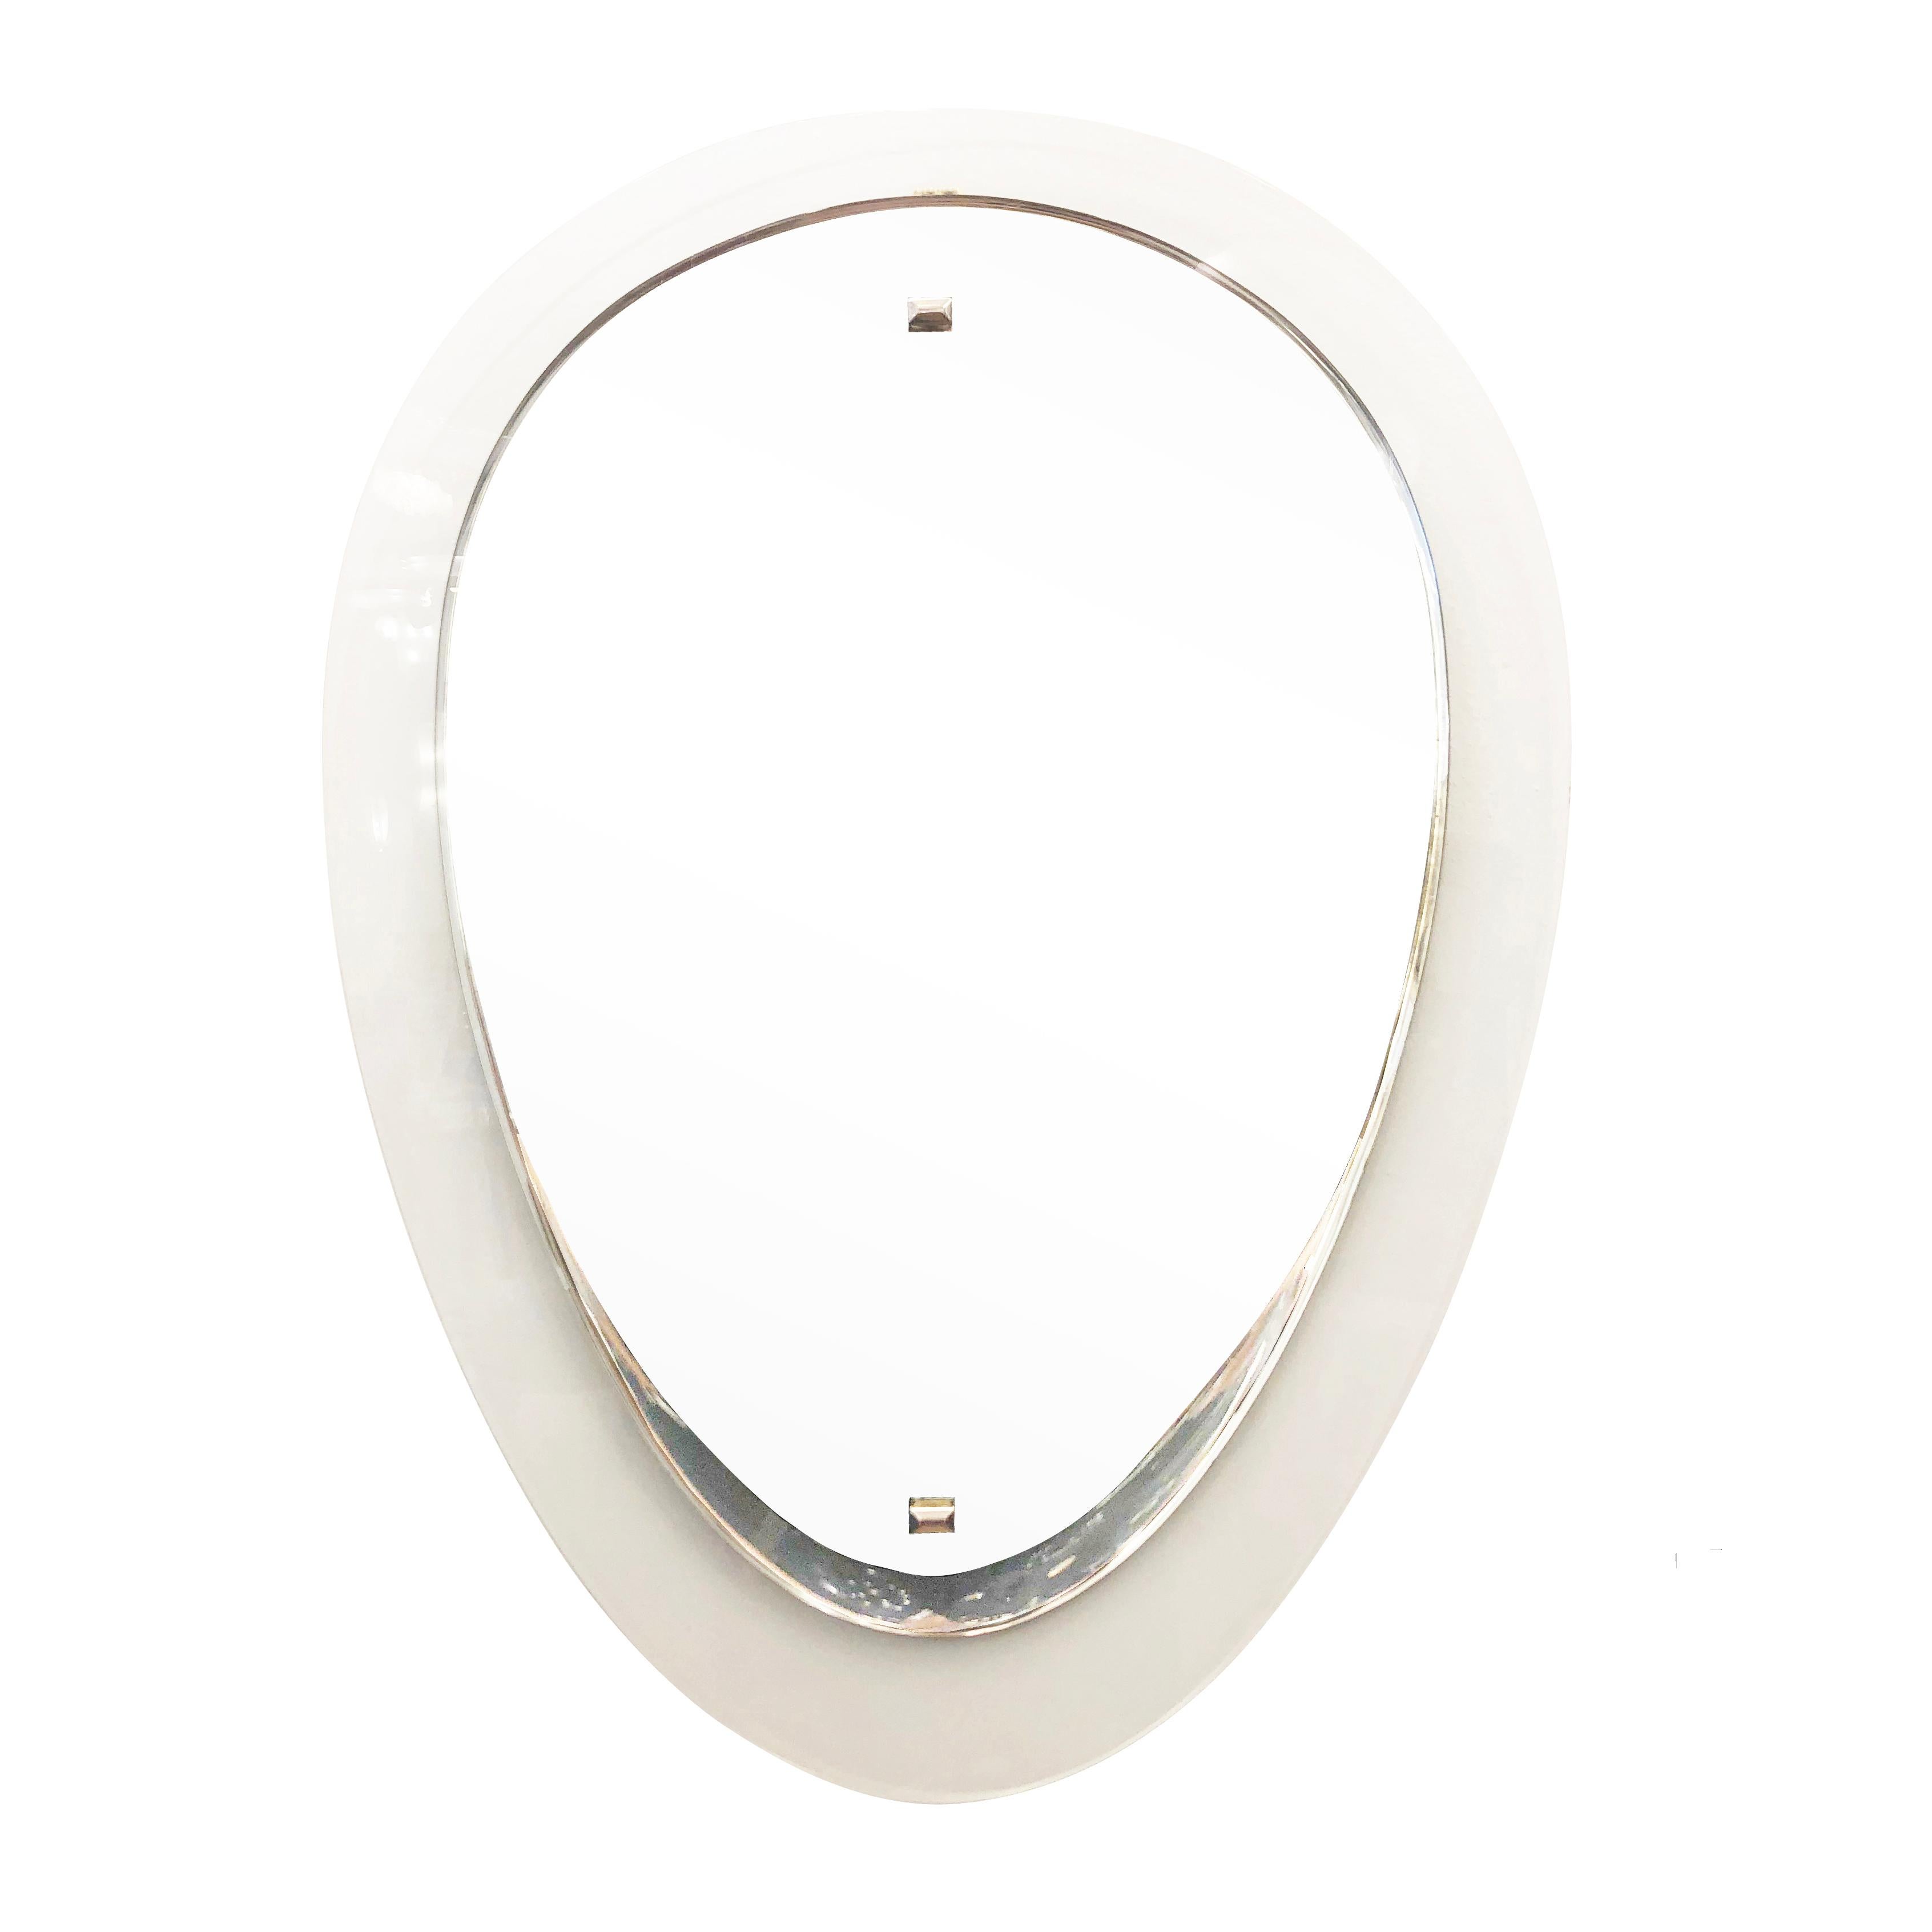 Italian midcentury mirror by Cristal Art in the shape of reverse teardrop. Noteworthy is the bevel on the mirror which gives the piece depth. Hardware is polished nickel. 

Condition: Good vintage condition, minor wear consistent with age and use-